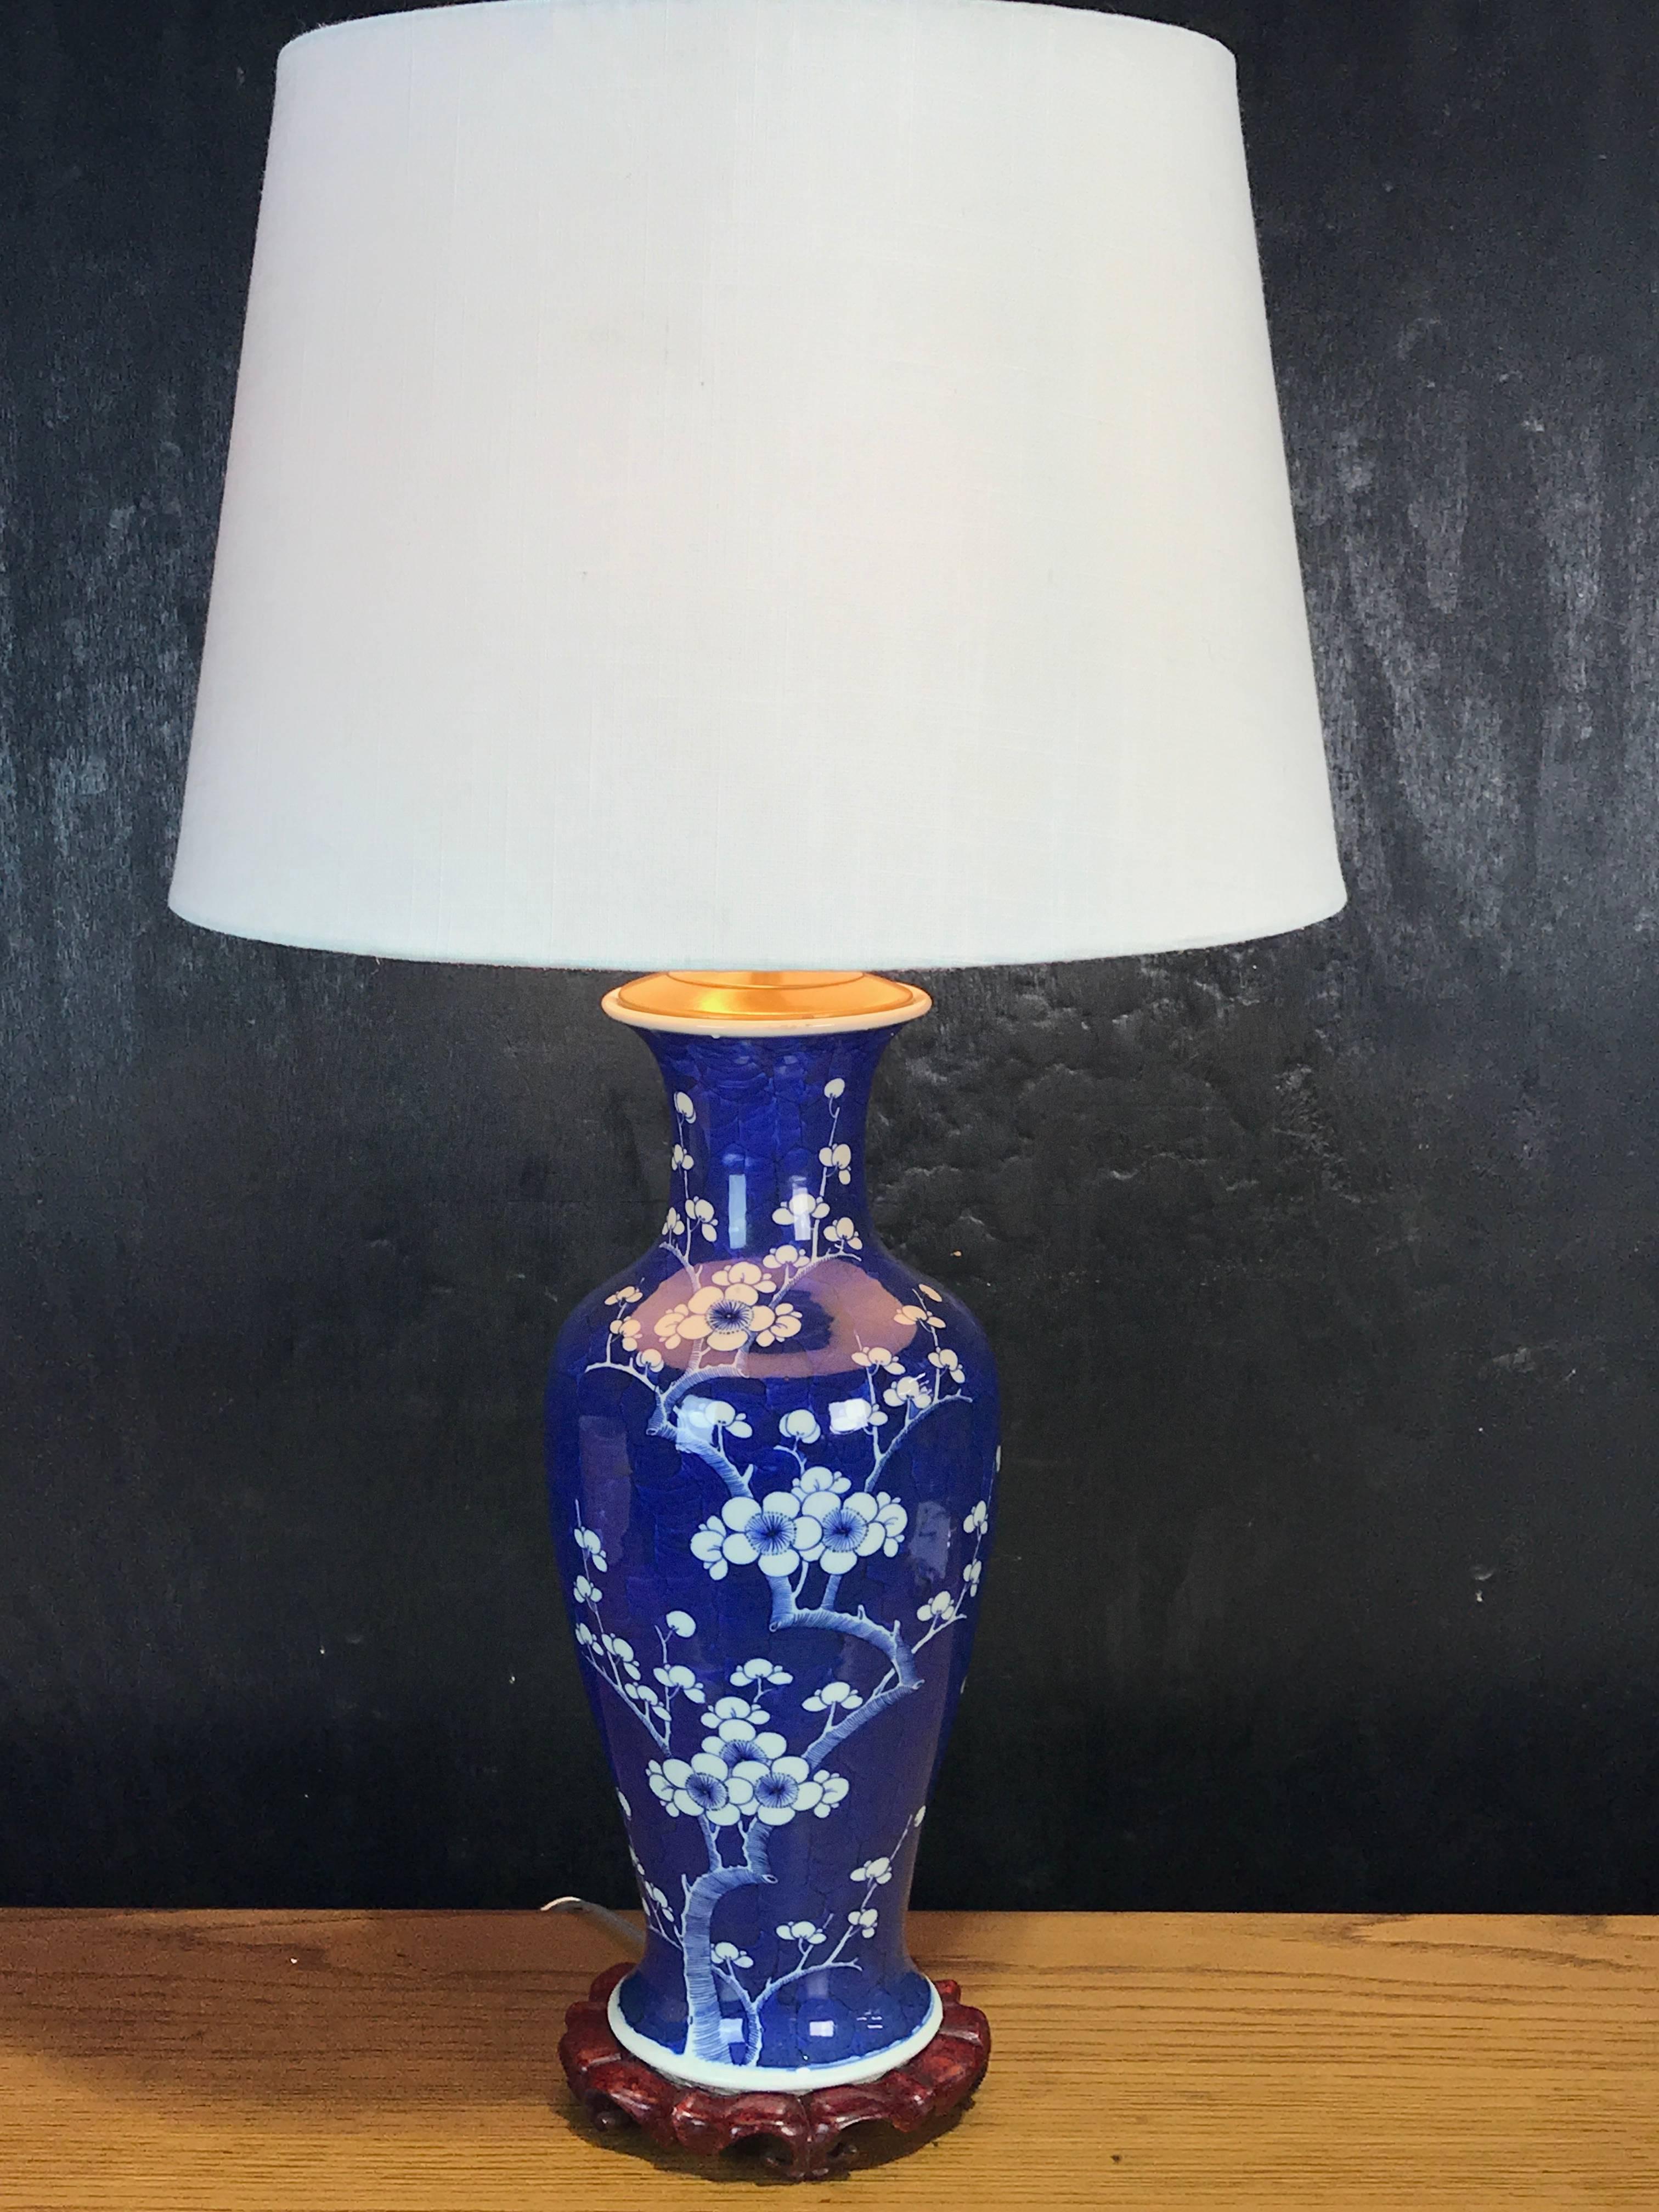 Chinese Export Prunus Vase, Now as a Lamp
Early 20th Century, China
Dimensions: Height: 24 in Diameter: 7 in

Bring home this beautifully crafted Chinese Export prunus vase, which has been thoughtfully reimagined as a lamp. Standing at a good size